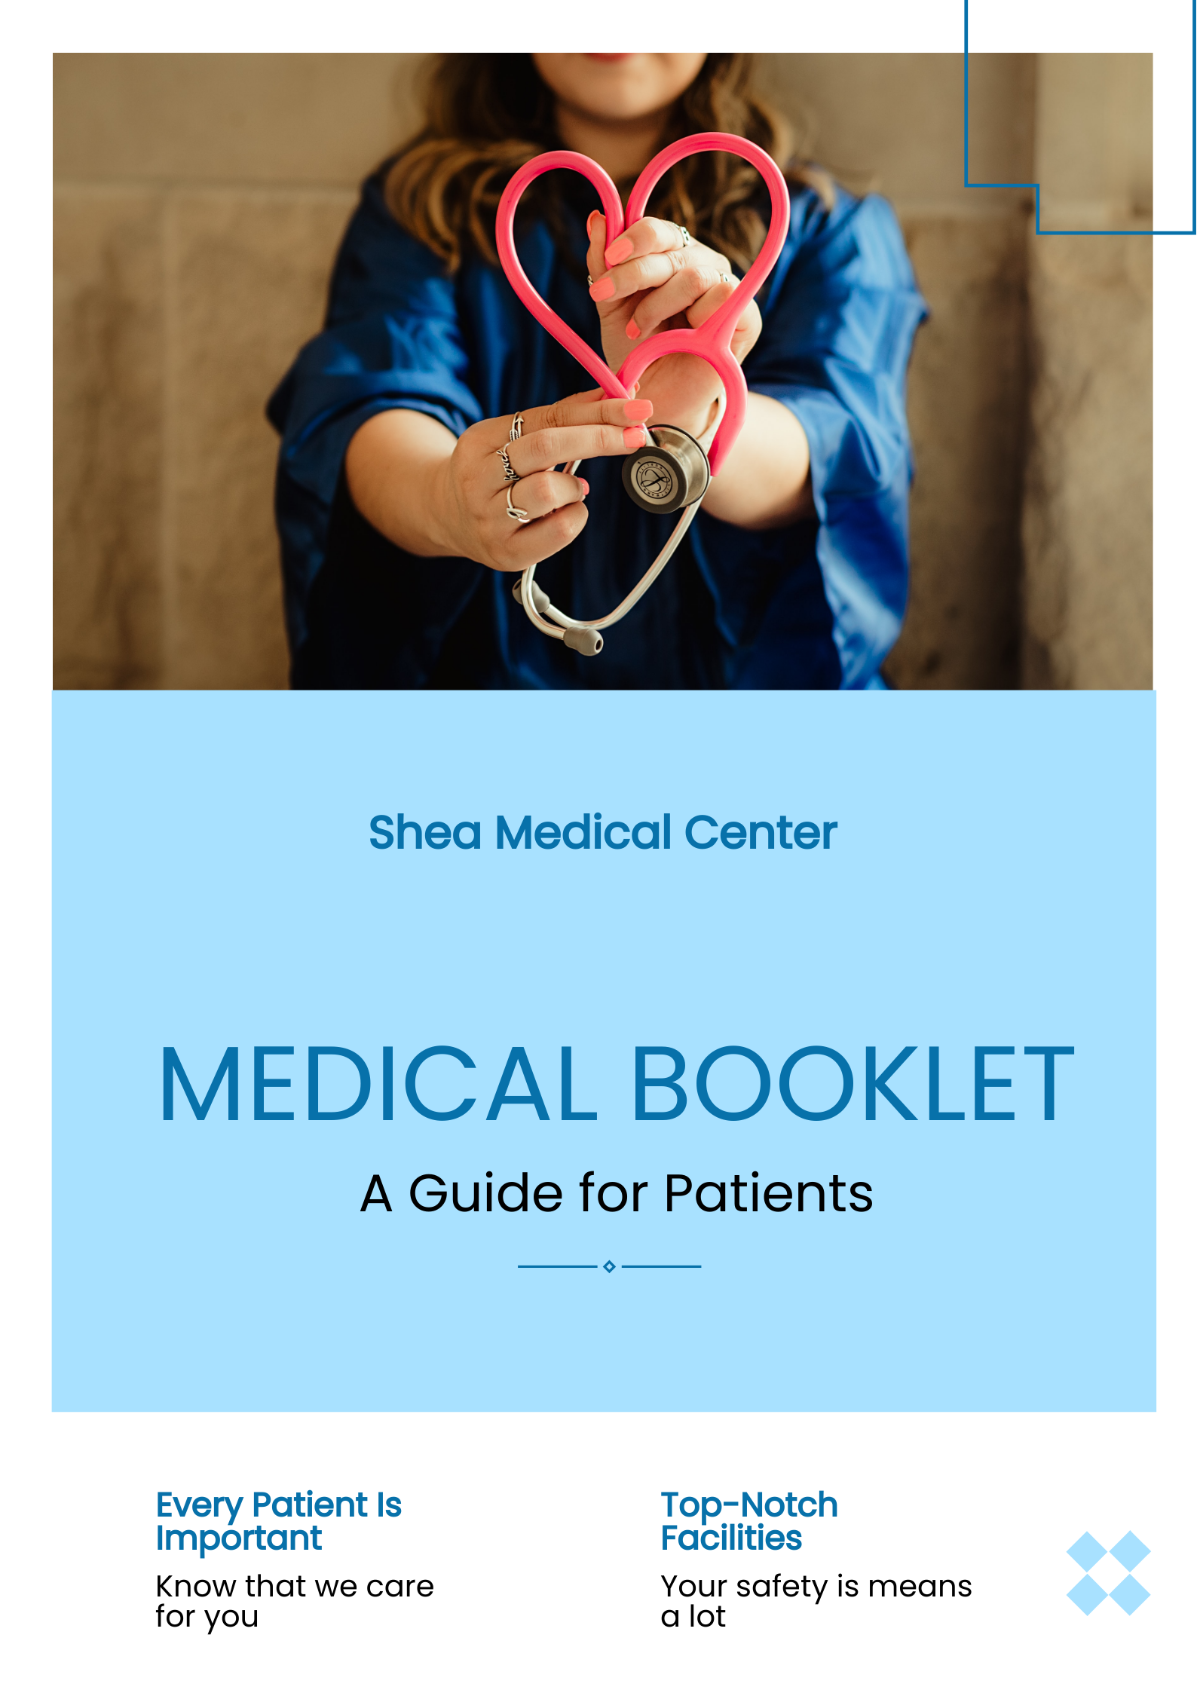 Medical Booklet Template